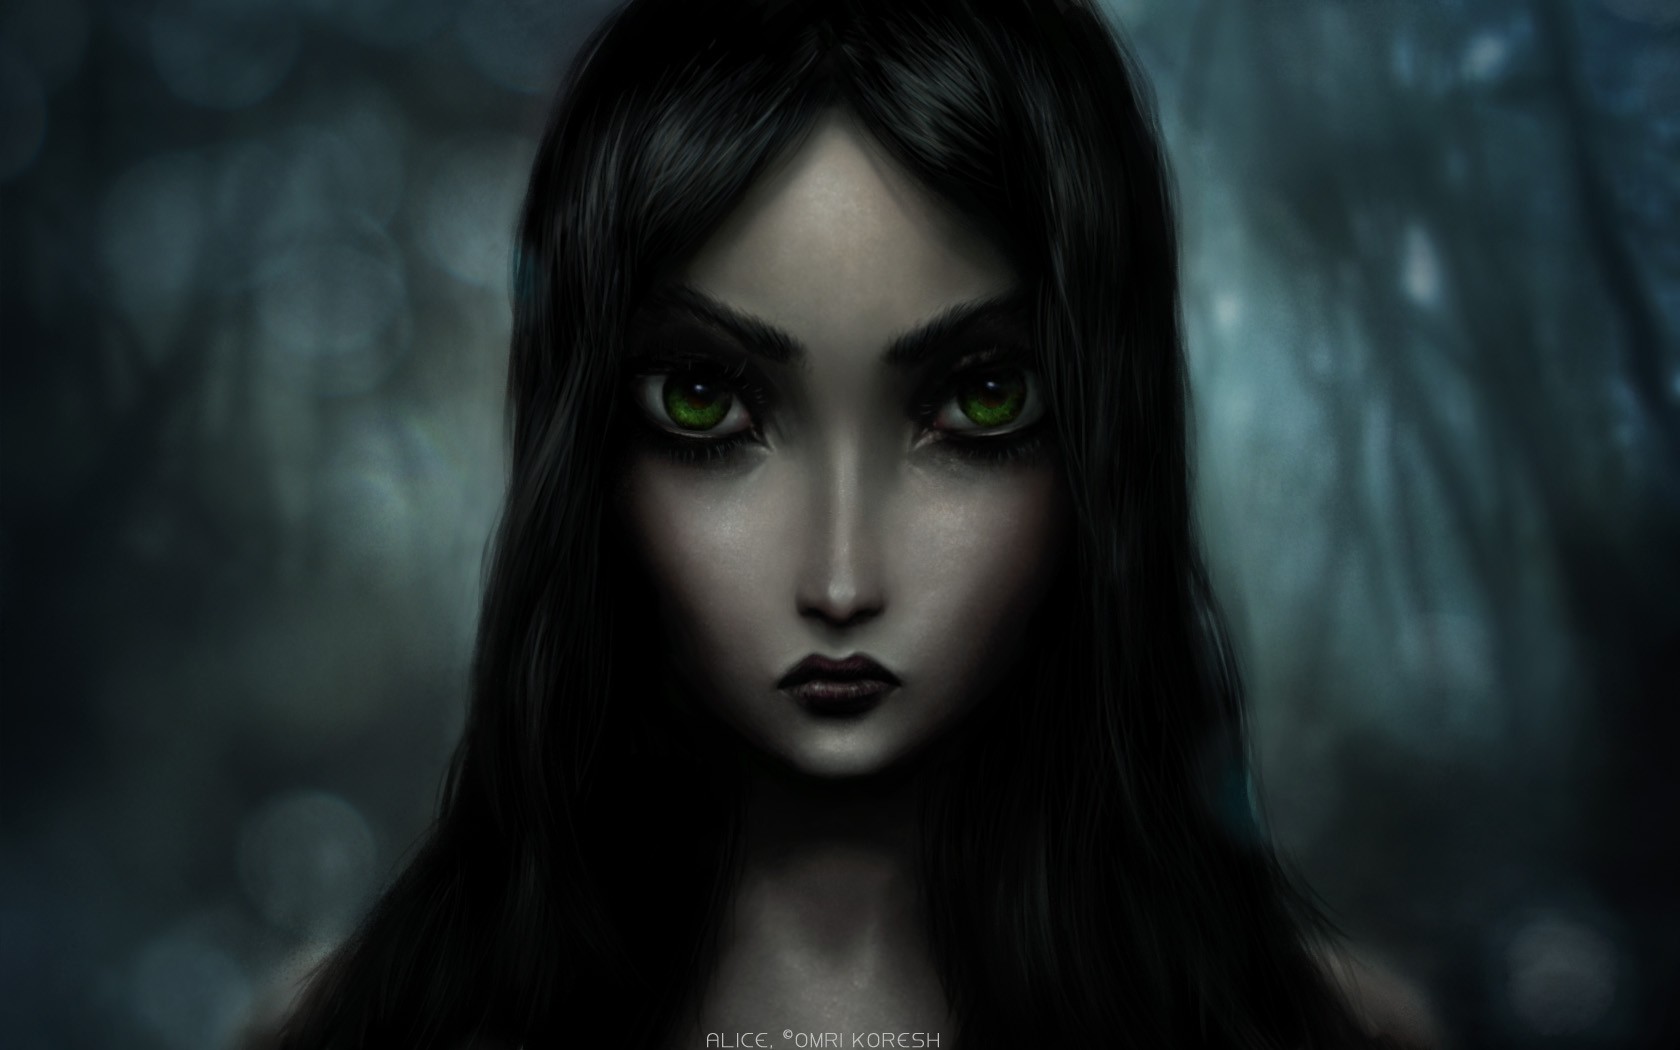 General 1680x1050 American McGee's Alice Alice: Madness Returns Alice in Wonderland Alice video games face fan art closeup black hair video game art video game girls green eyes